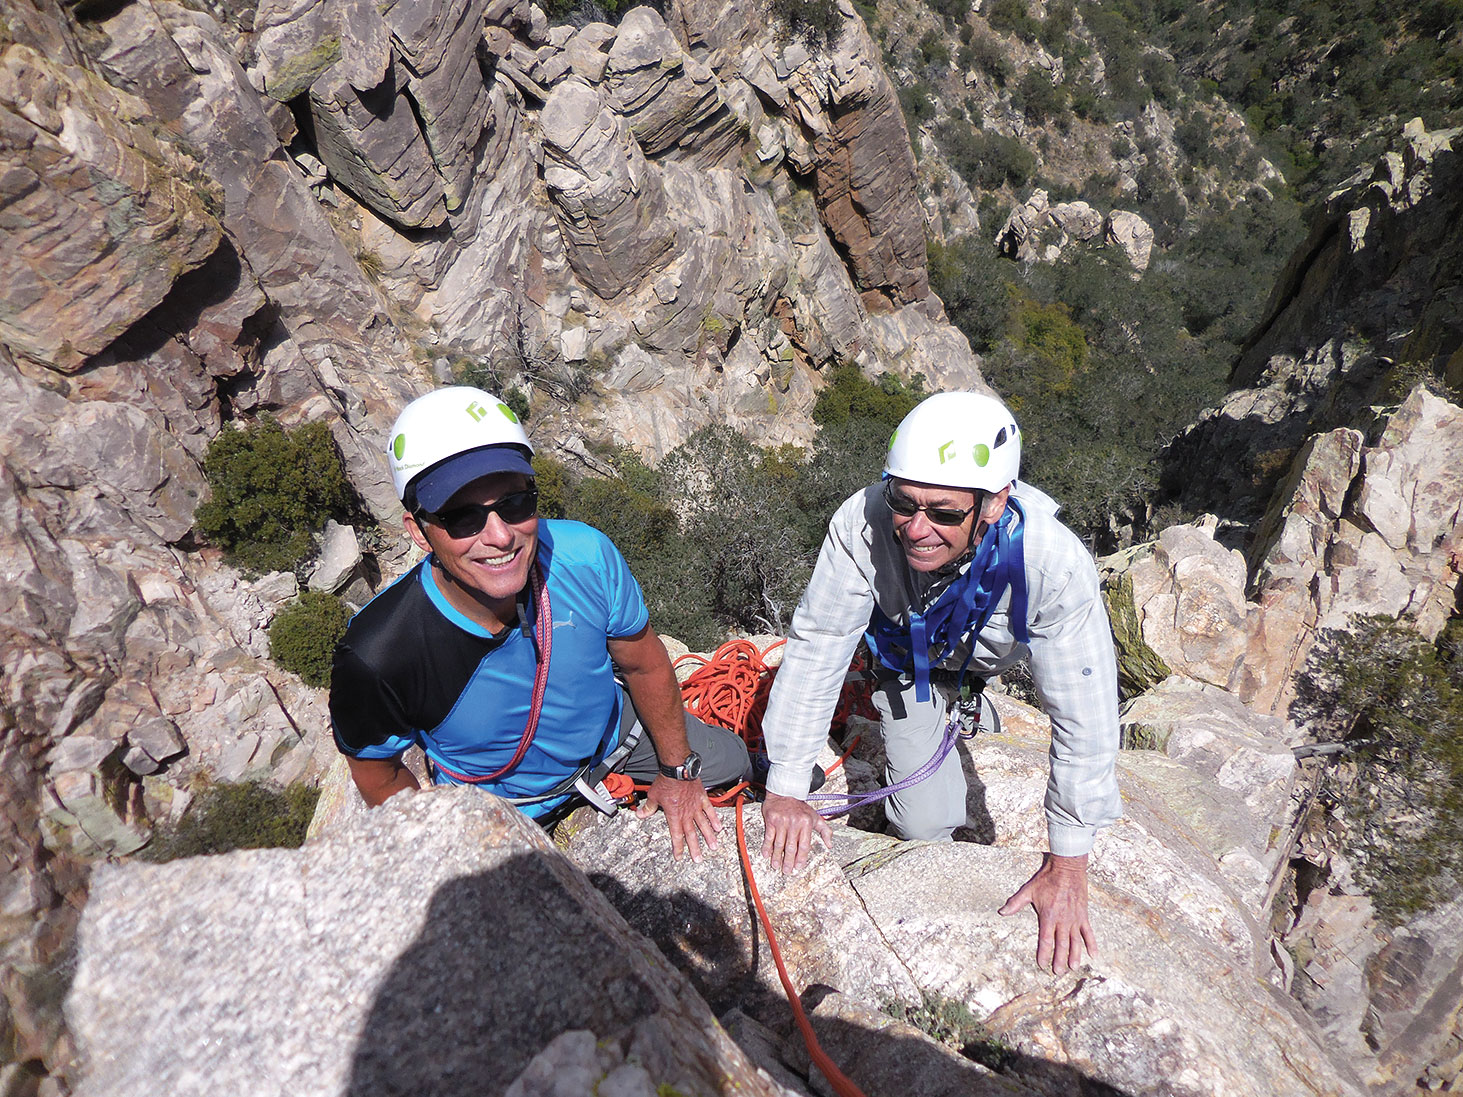 Mike Wolters and Frank Earnest at the top belay station; photo by Roy Carter